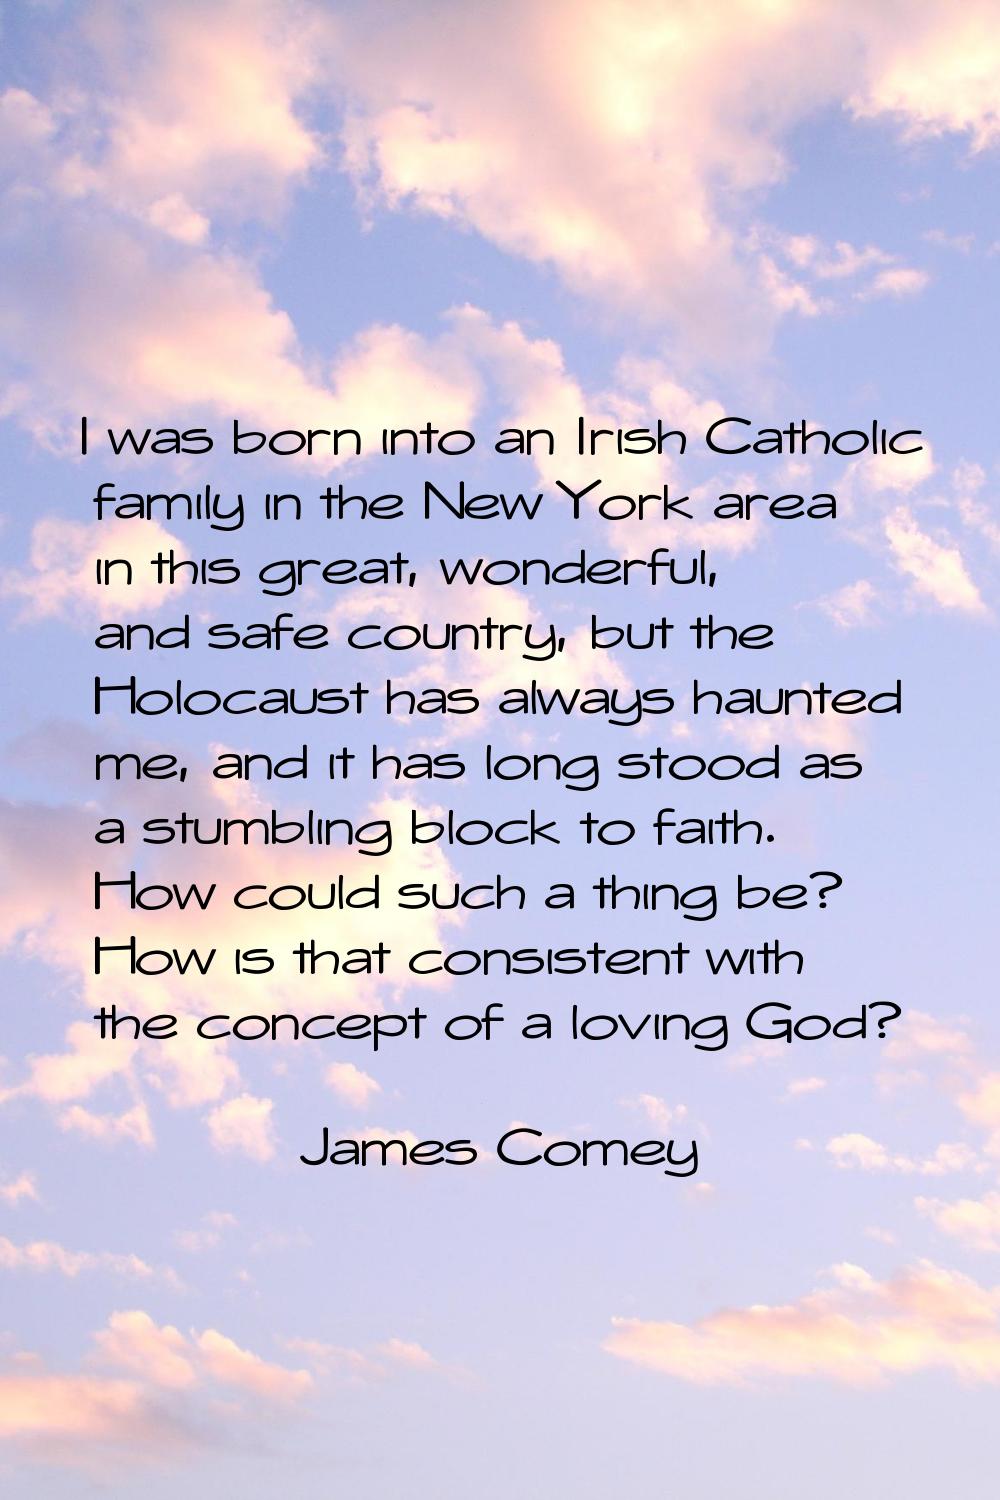 I was born into an Irish Catholic family in the New York area in this great, wonderful, and safe co